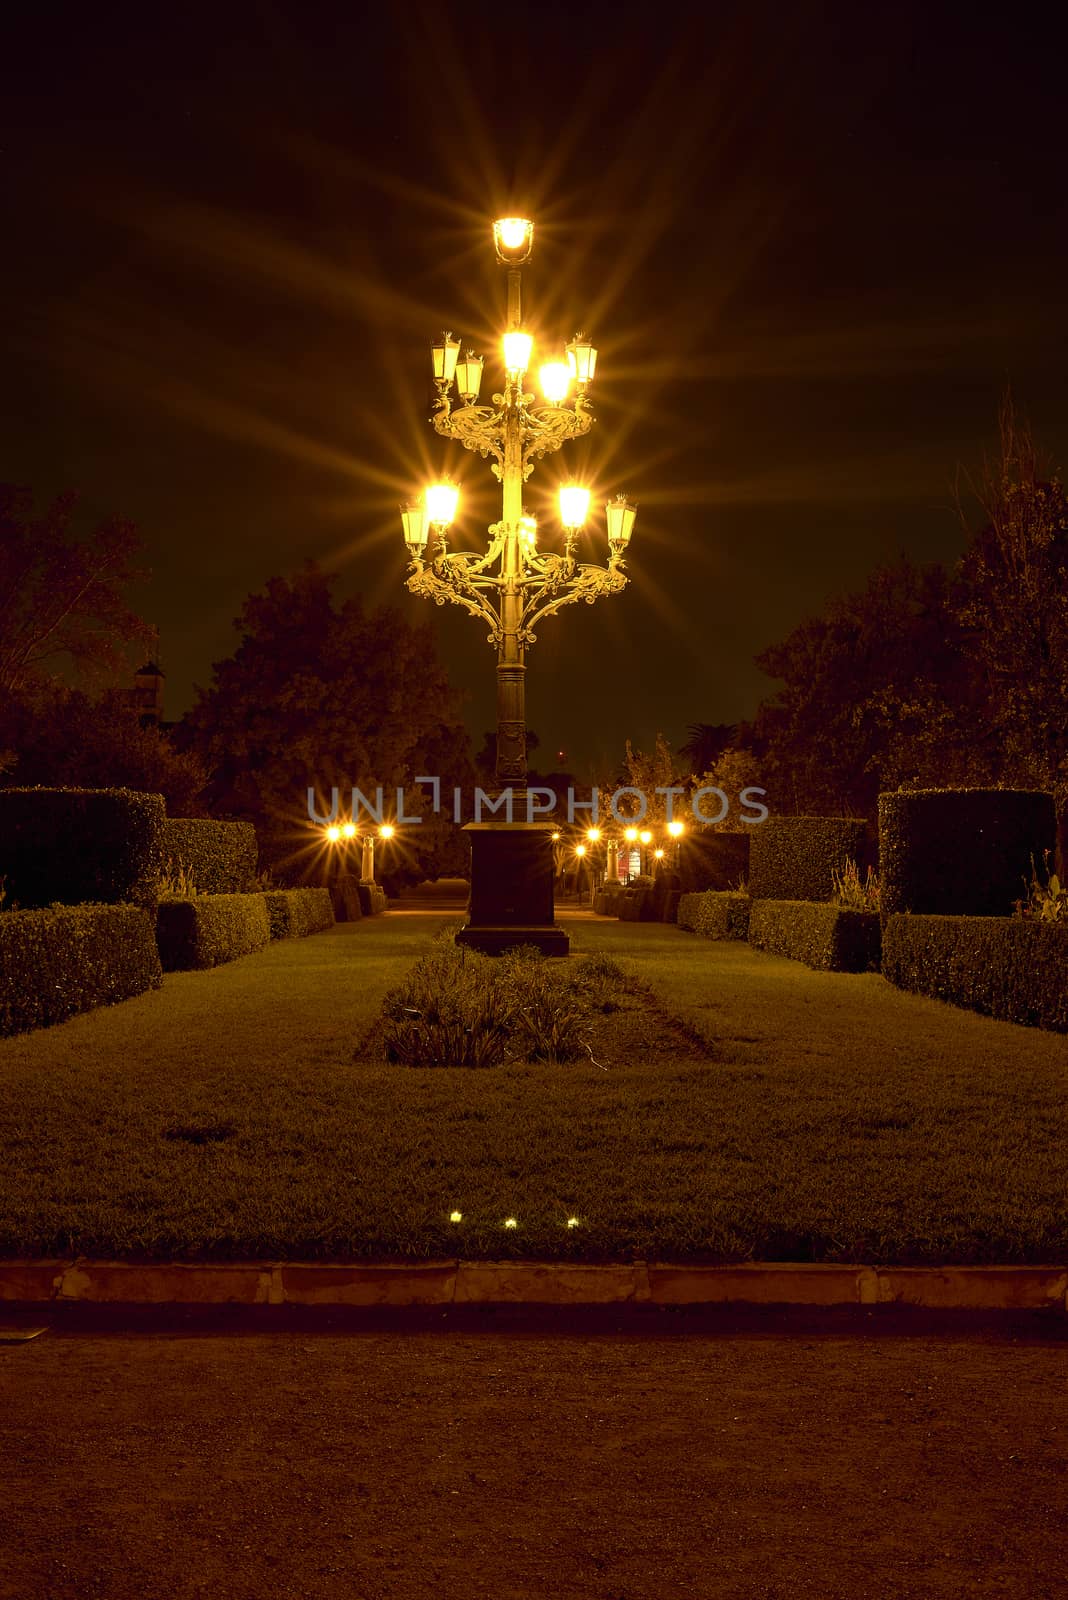 Ornamental lamppost in beautiful romantic night garden, candles, solitary, warm